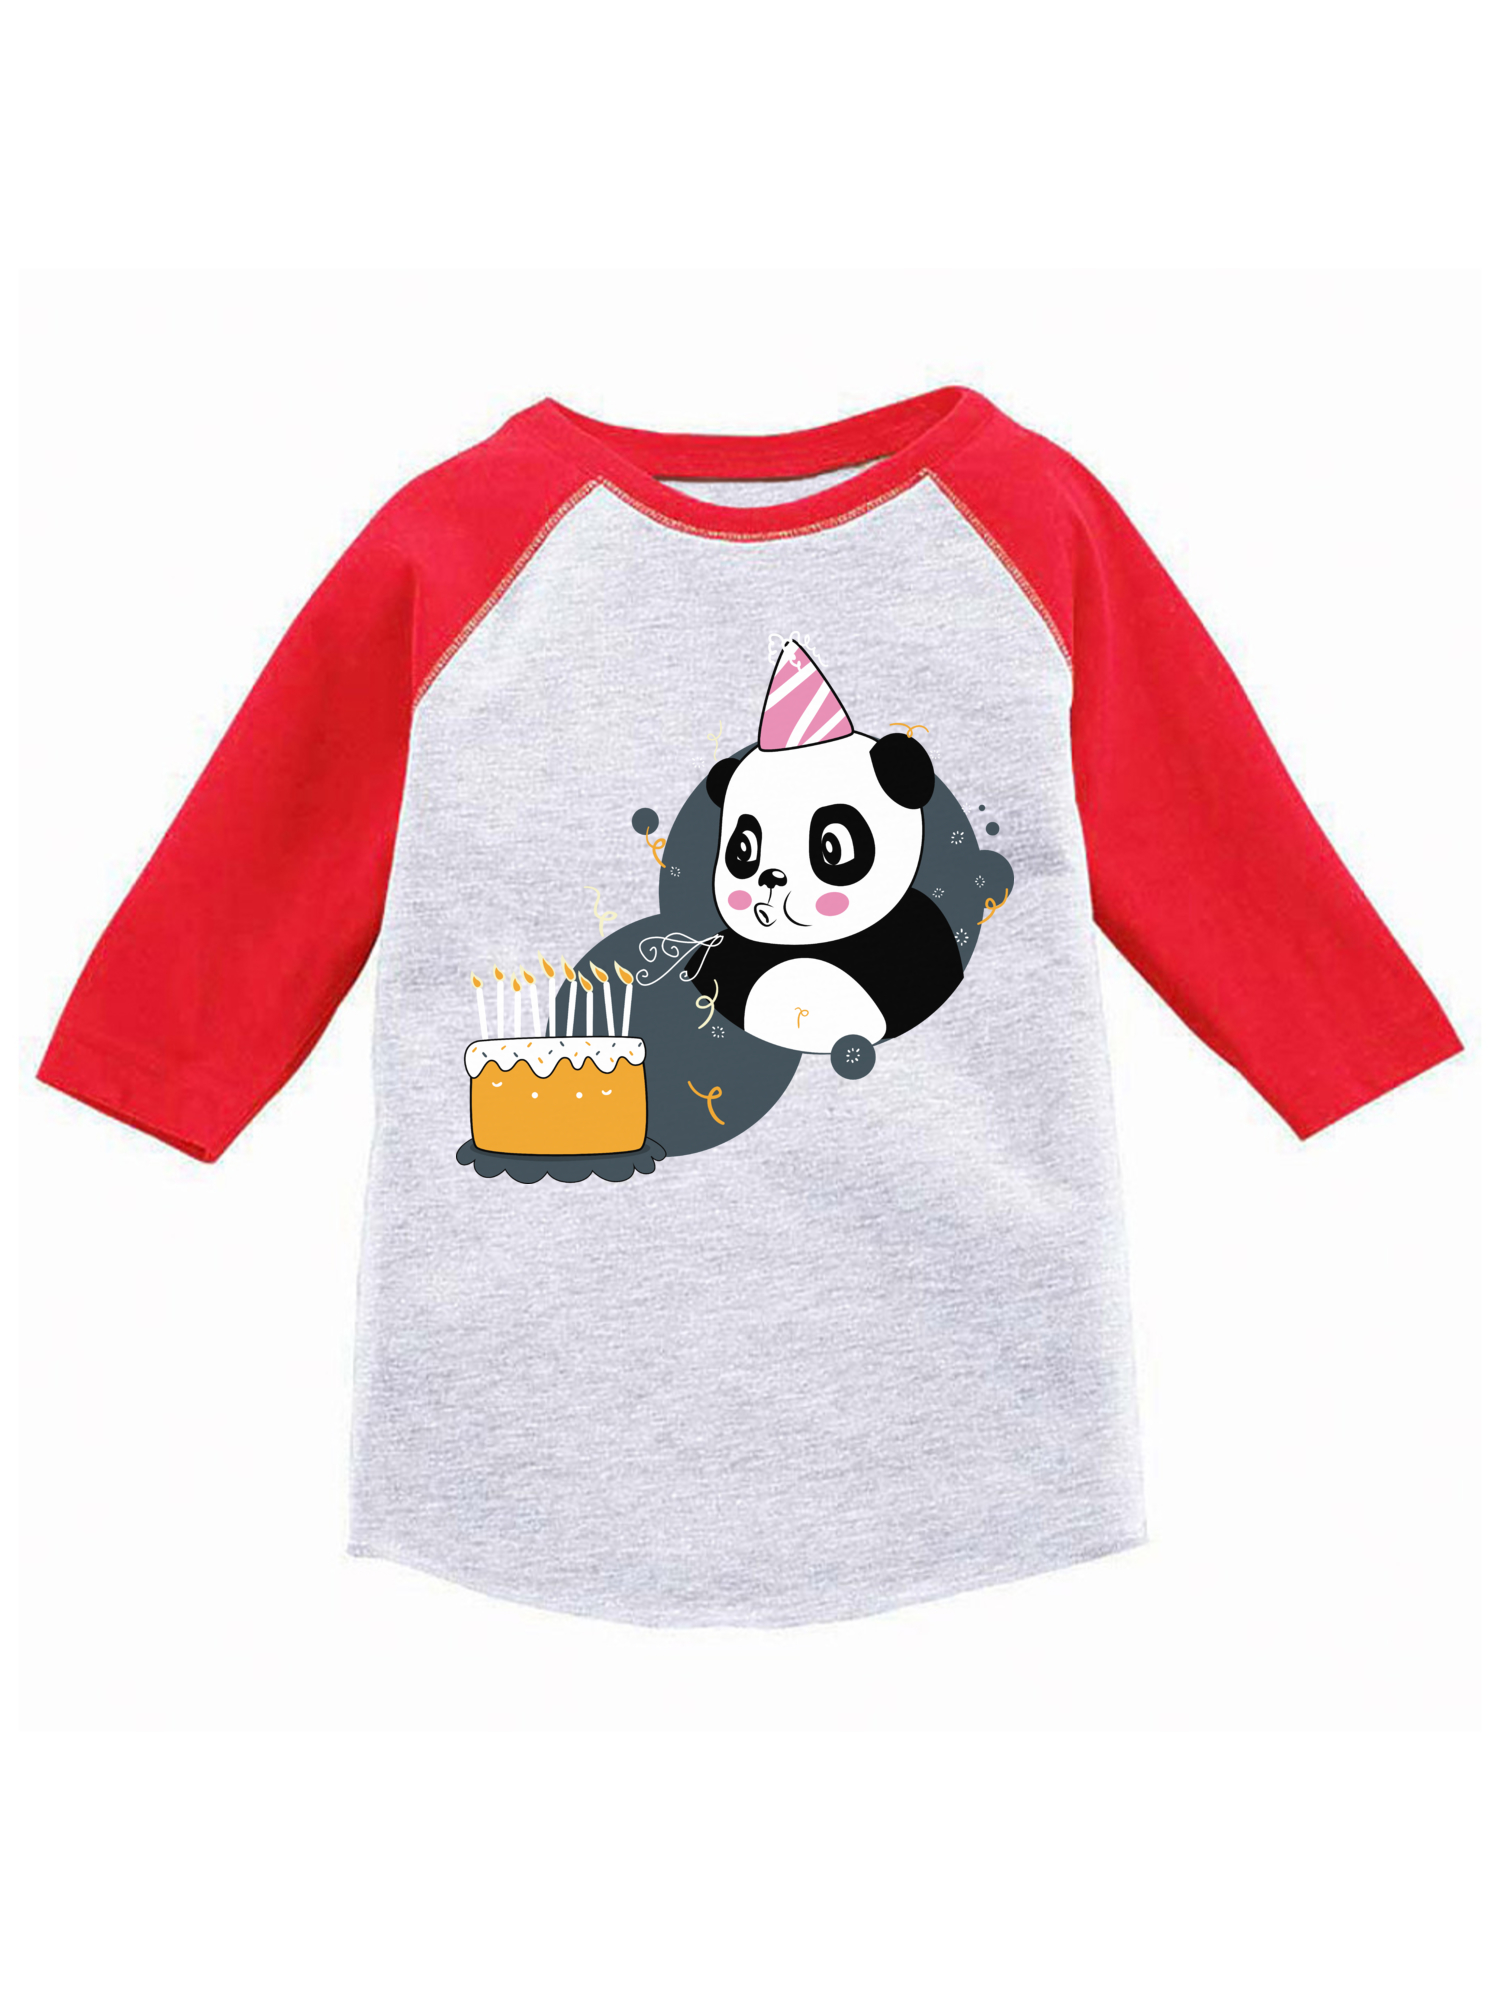 Funny Baby Shower Gift Pet Baby Boy Outfit Animal Baby Clothes Girl Shirt Toddler Kids Tshirt Youth Tee Red Panda Baby Bodysuit